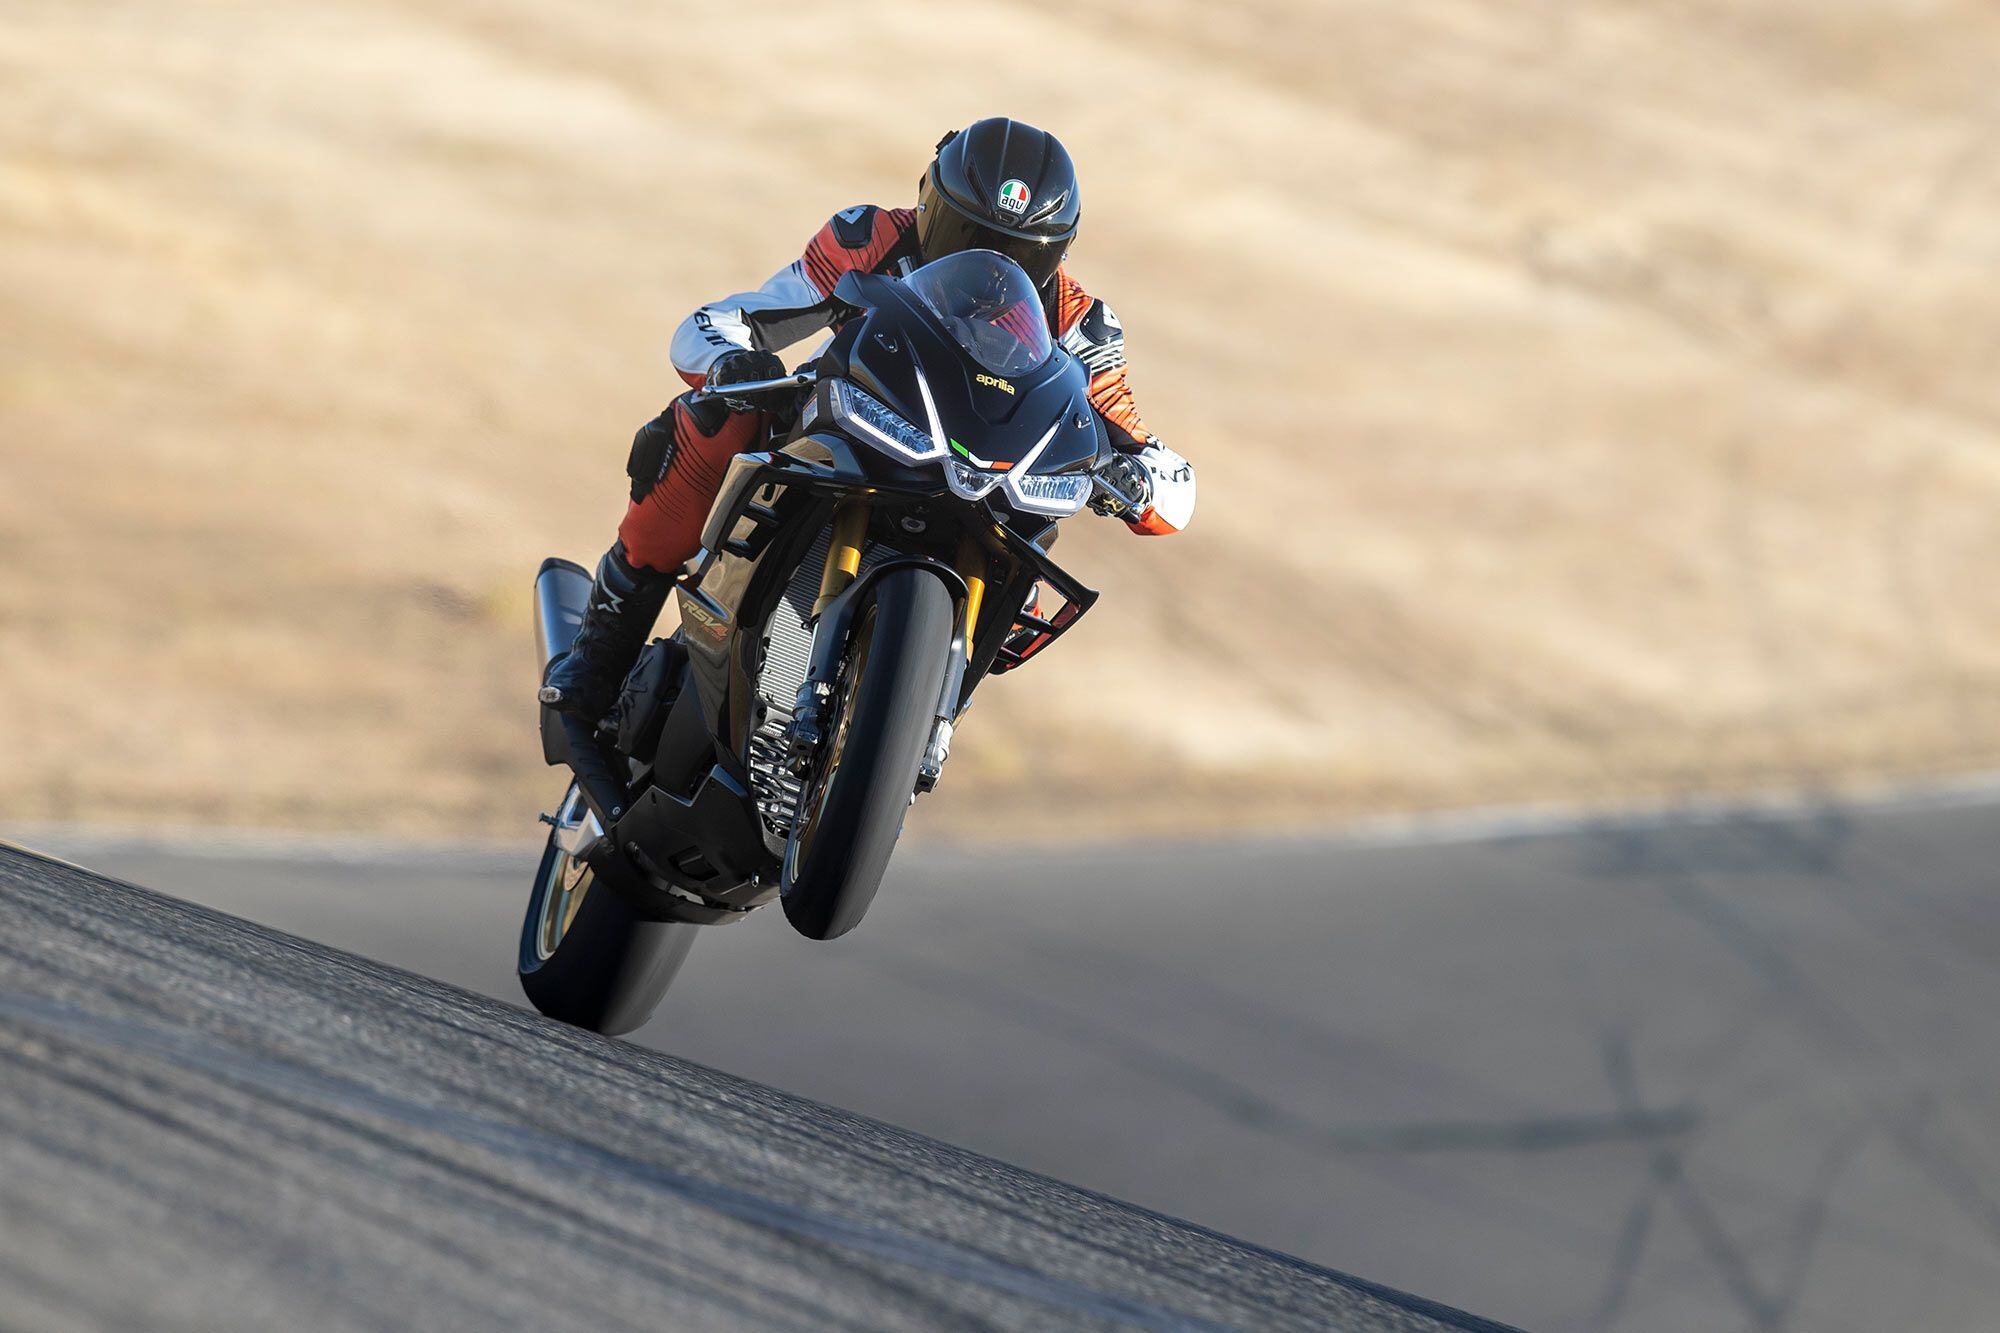 At 189 hp measured on the <i>Cycle World</i> dyno, the RSV4 Factory produces the most power of any bike in this year’s test. Still, tractable delivery makes it controllable at corner exit.